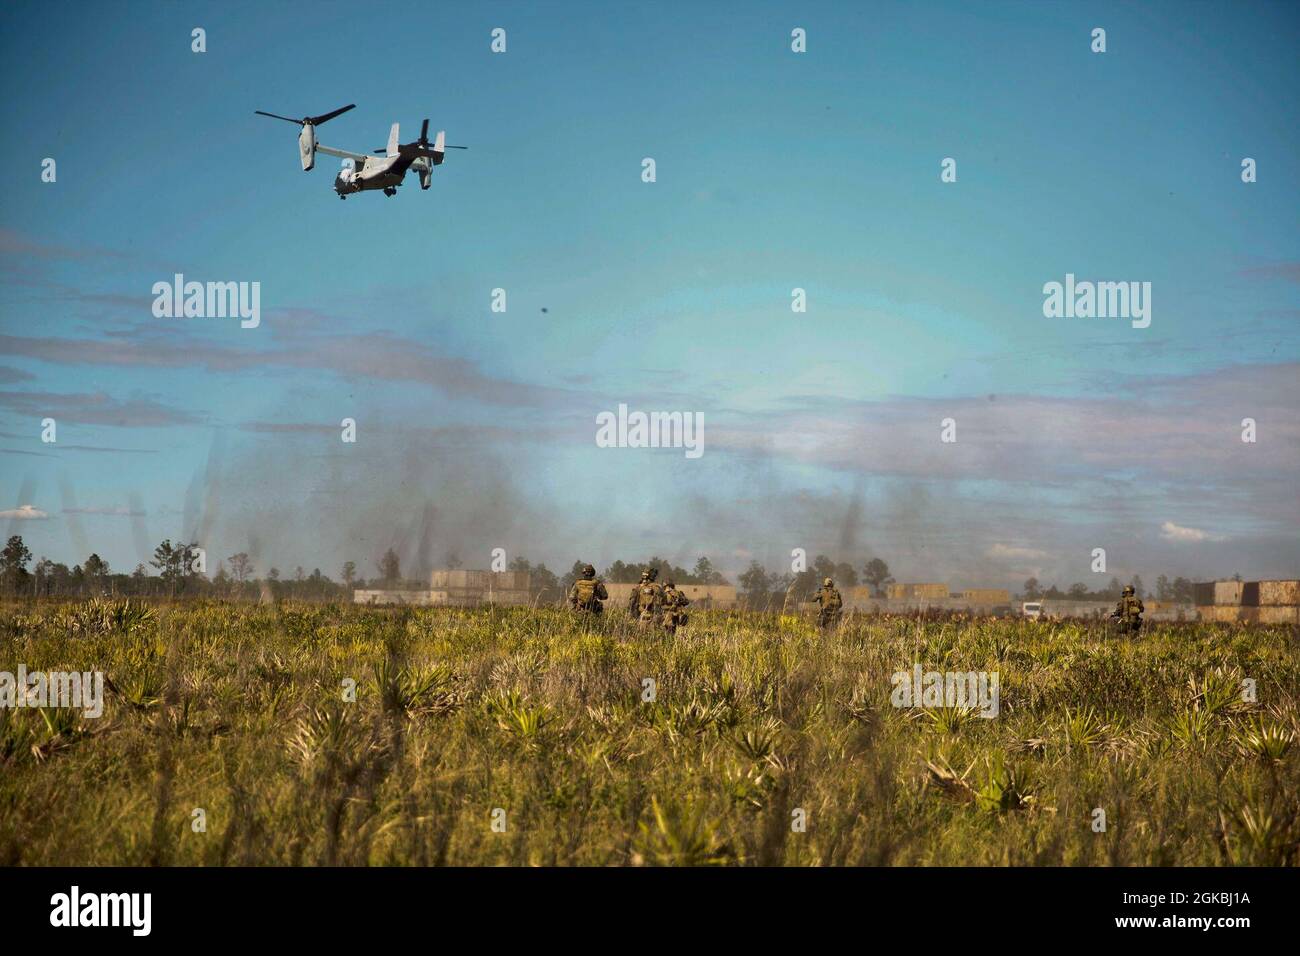 An MV-22 Osprey with the 24th Marine Expeditionary Unit (MEU) departs an objective area while participating in an amphibious raid during Composite Unit Training Exercise (COMPTUEX) at Avon Park, Florida on March 4, 2021. COMPTUEX is a month-long training event designed to test the MEU’s capabilities against the full spectrum of military operations. Stock Photo